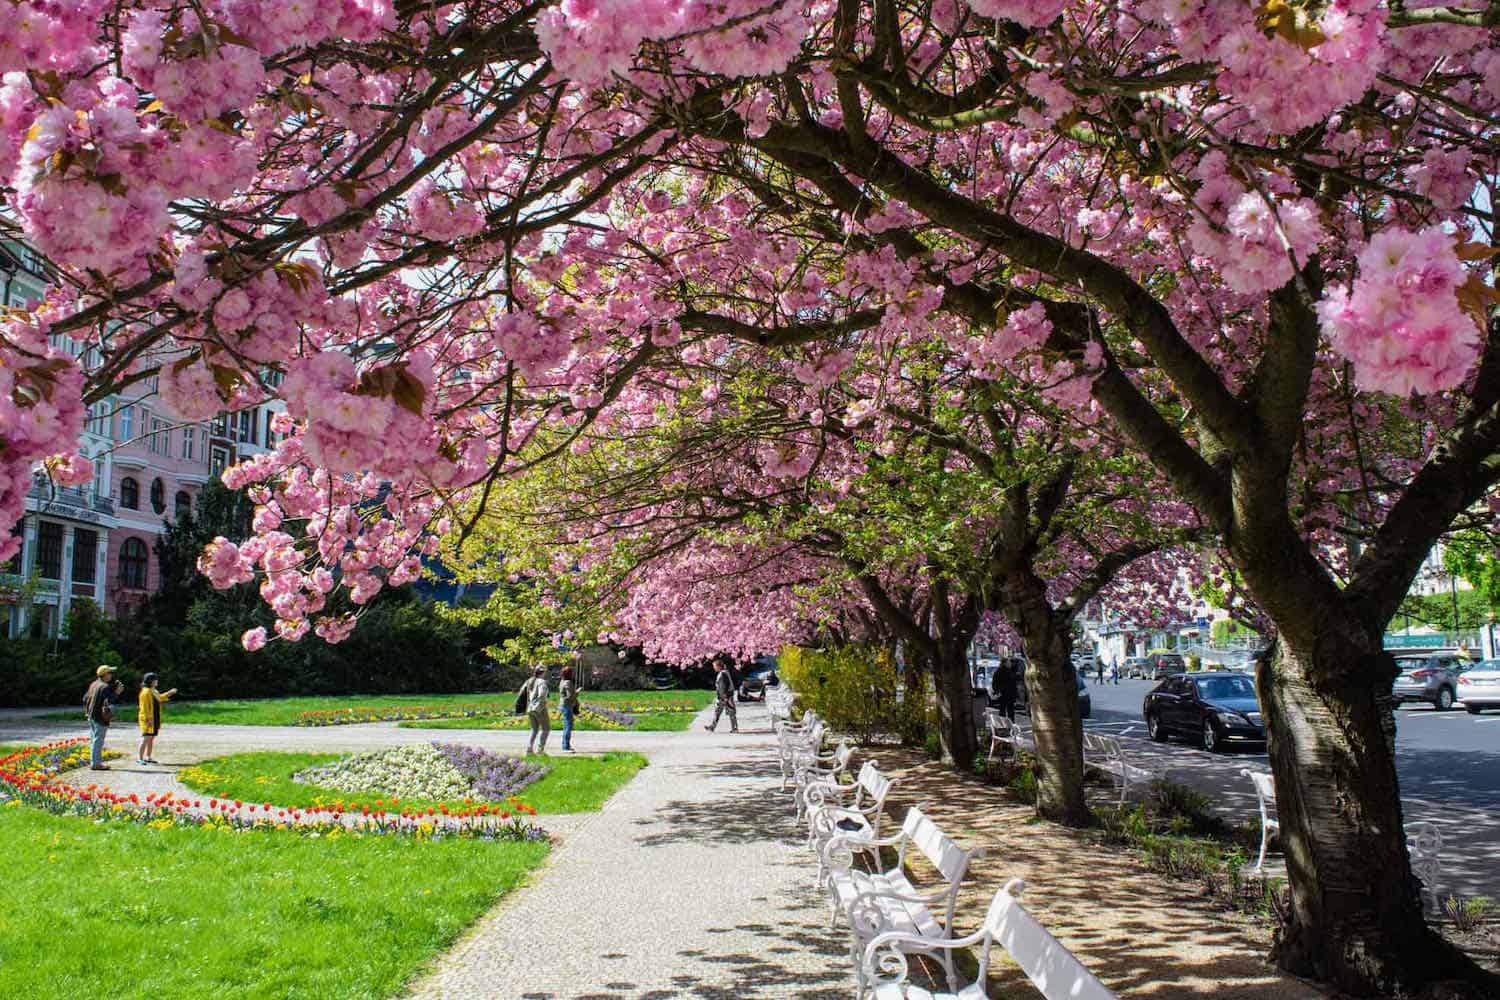 Where to See Spring Blossoms in Europe